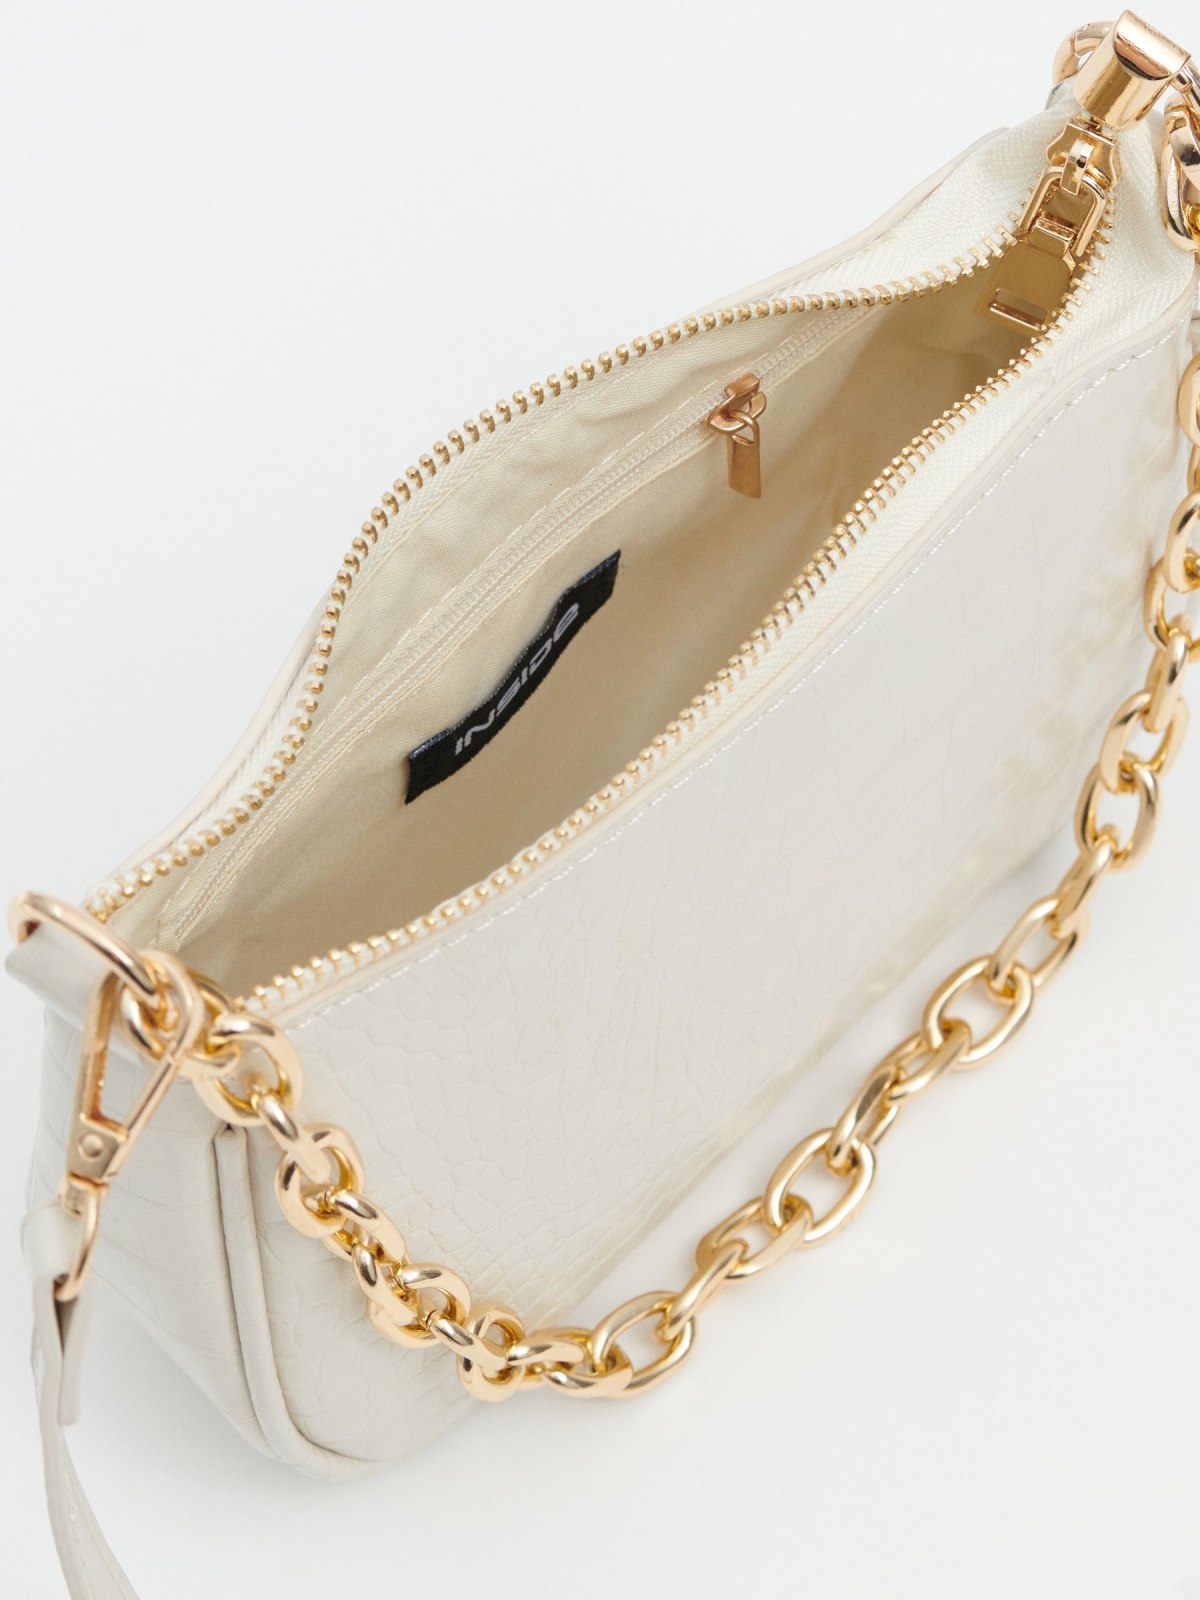 Chain effect leather bag off white detail view